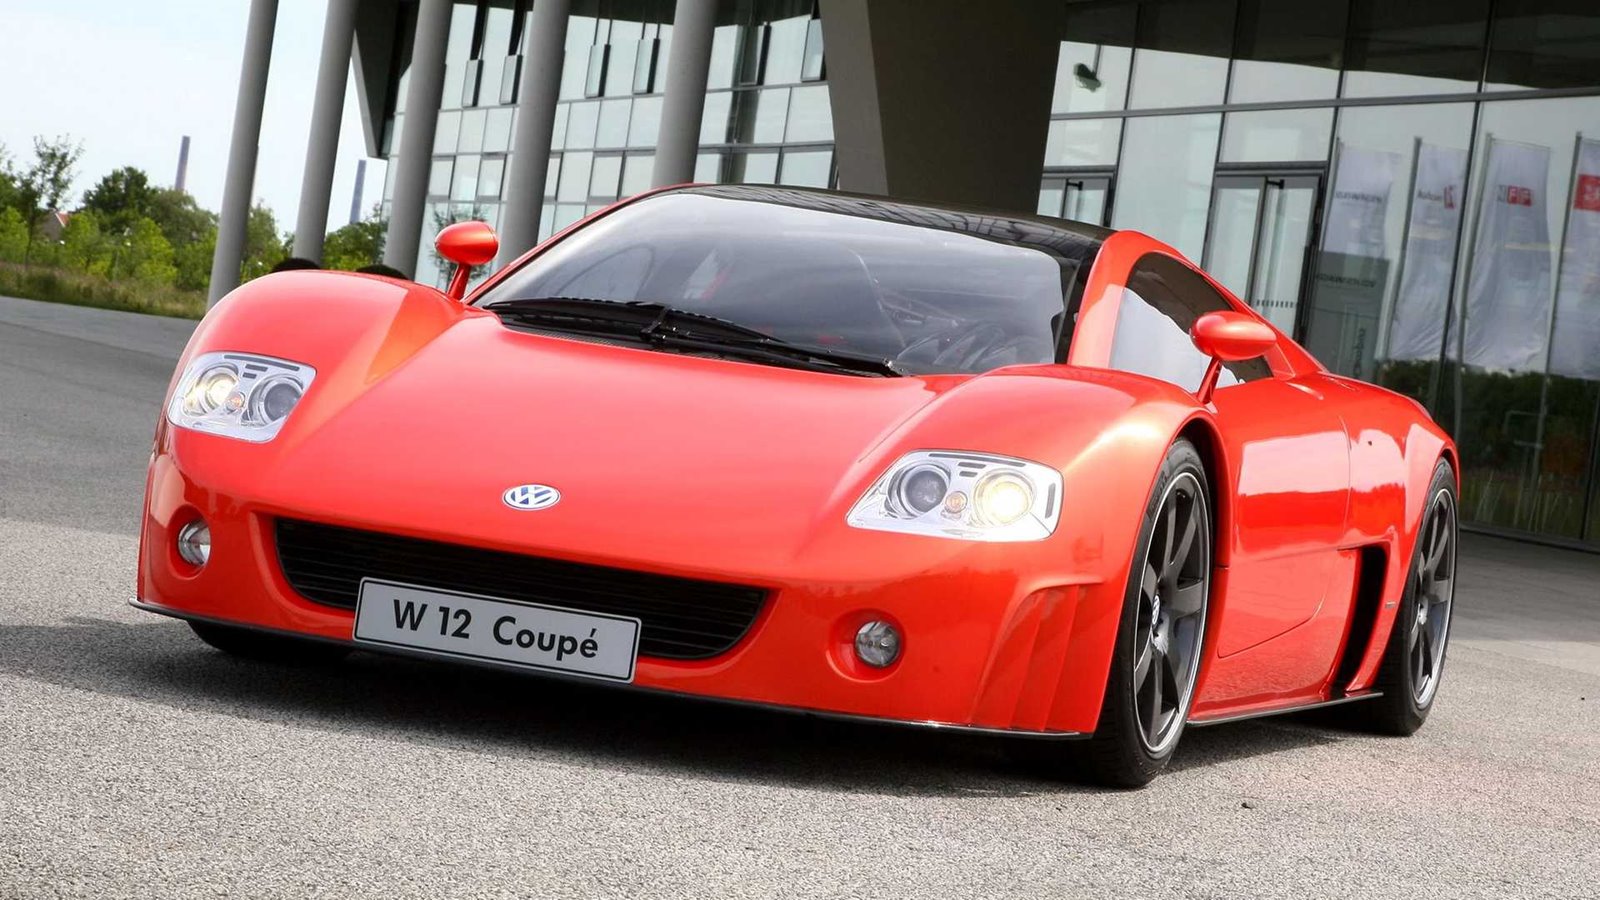 when VW wanted to have its own Veyron